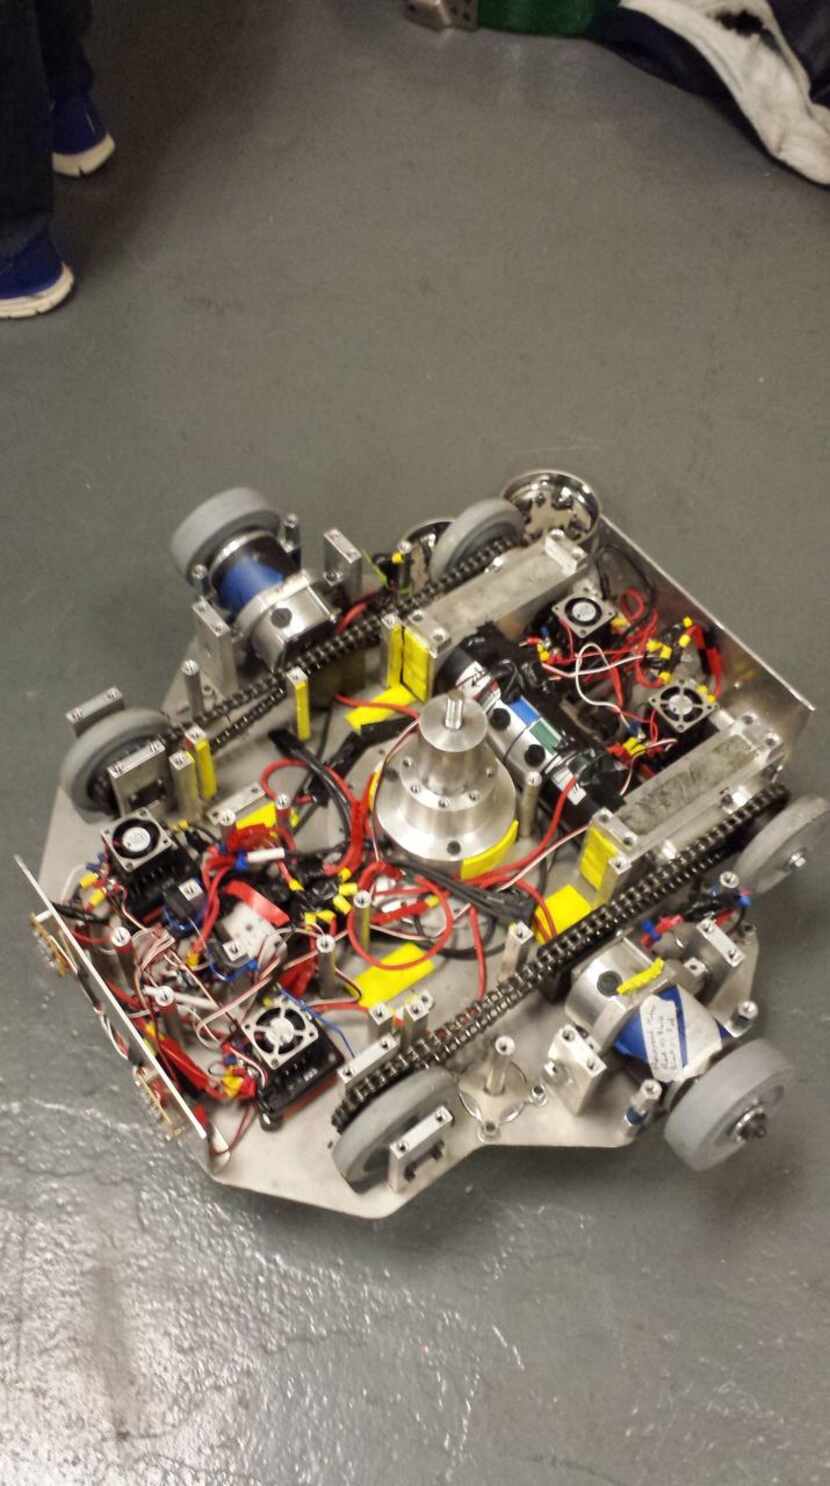 
The electrical and mechanical components of the Blender, UTD’s combat robot, were designed...